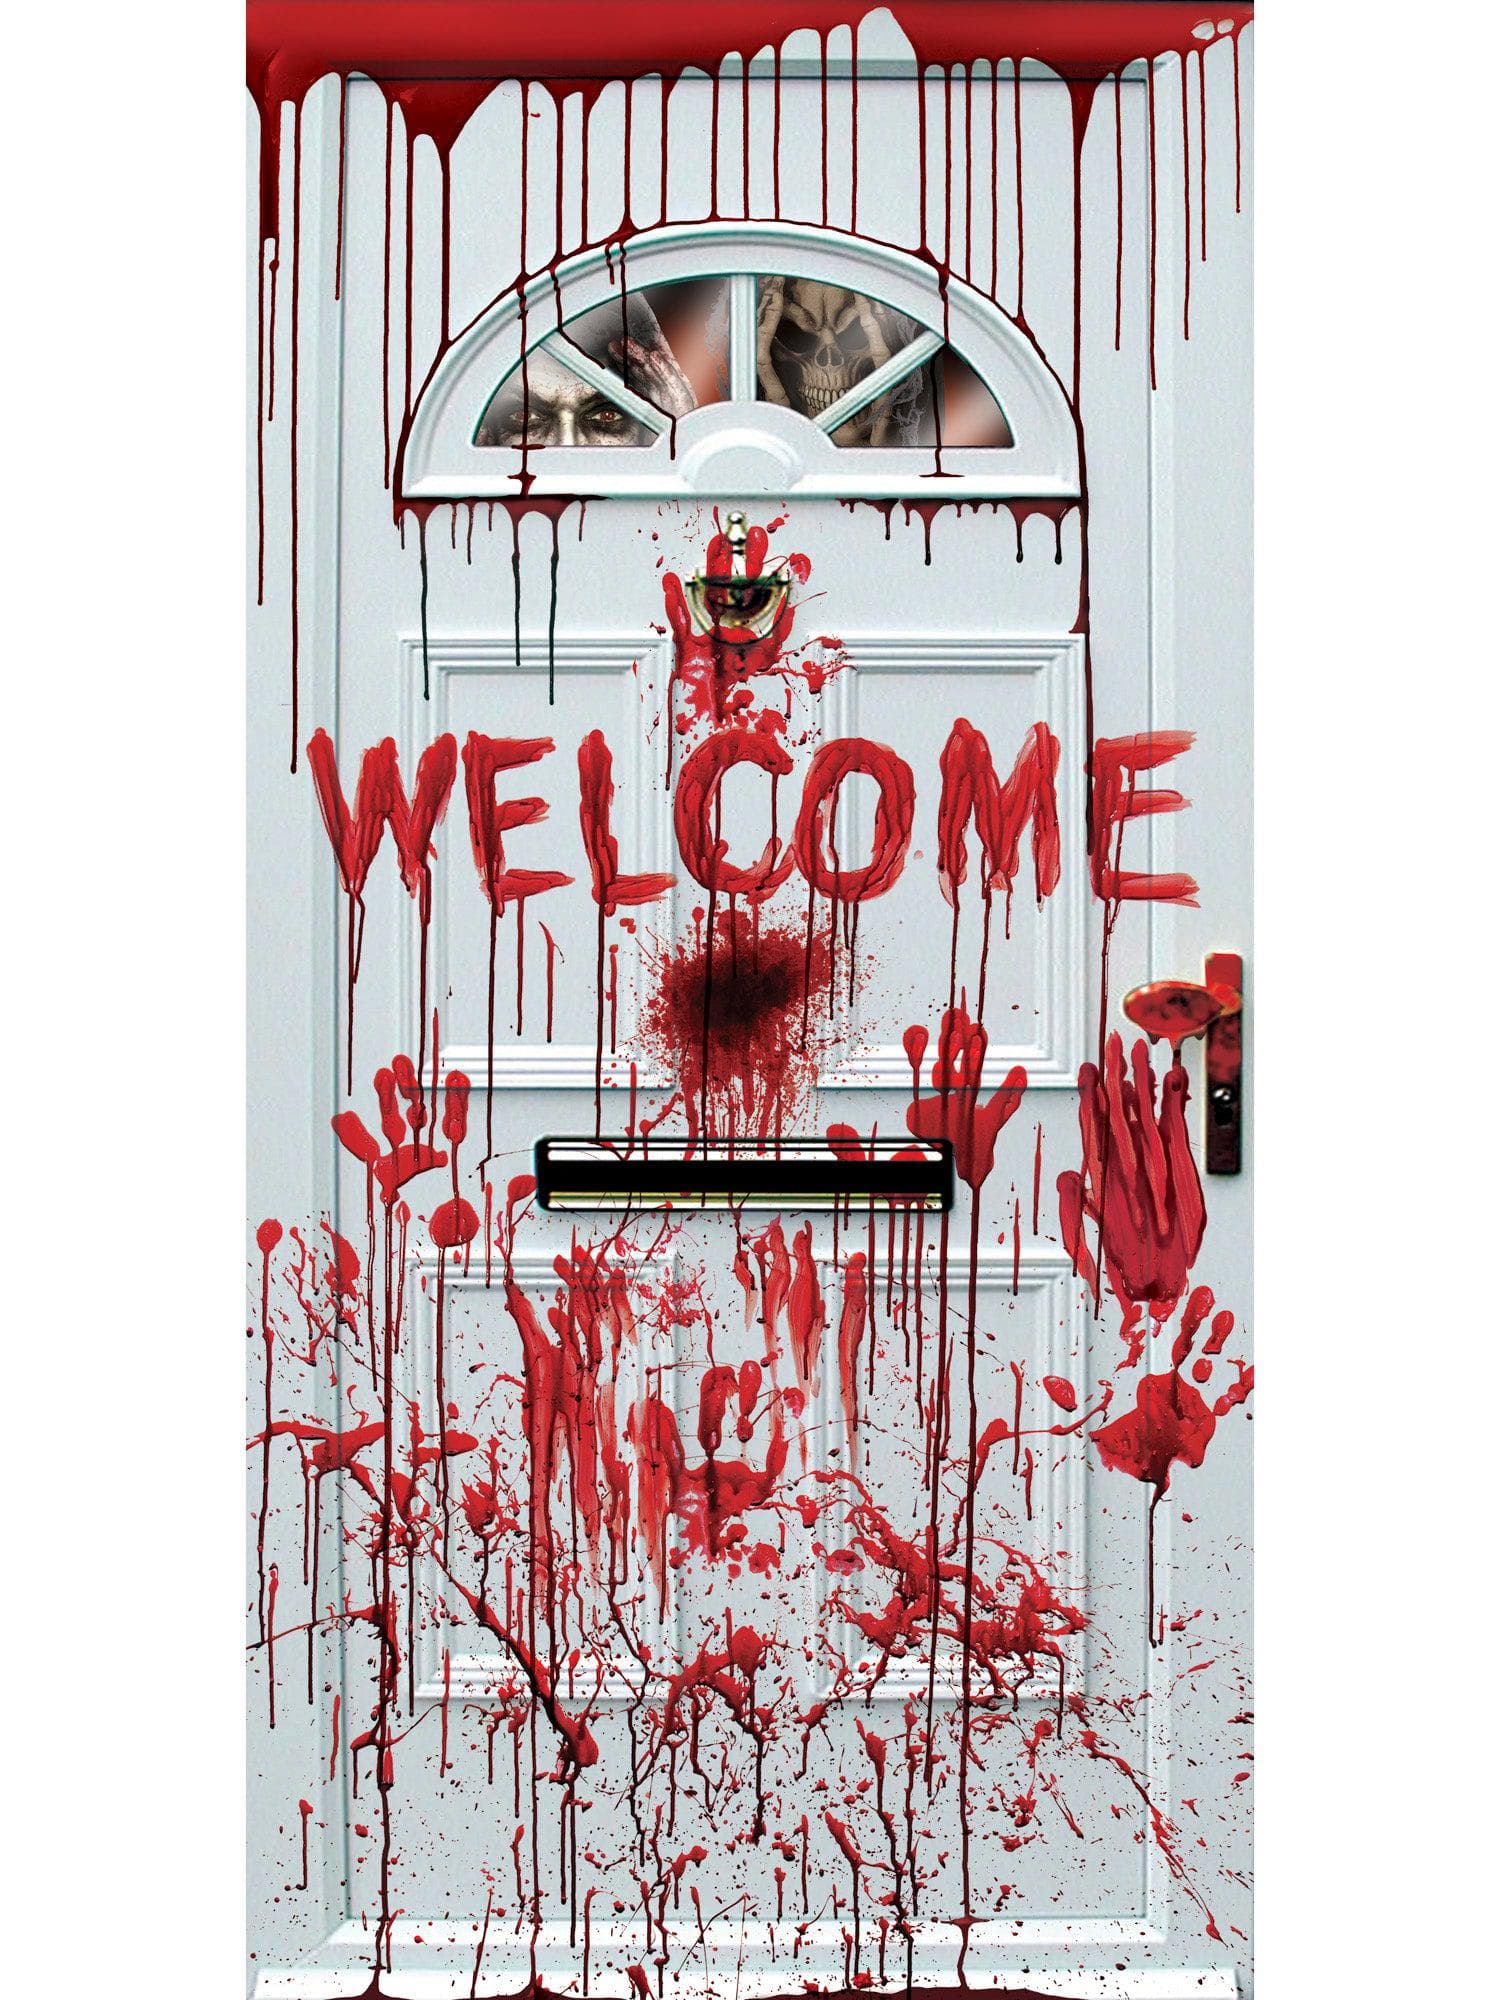 5 Foot Bloody Mess Welcome Door Cover Decoration - costumes.com